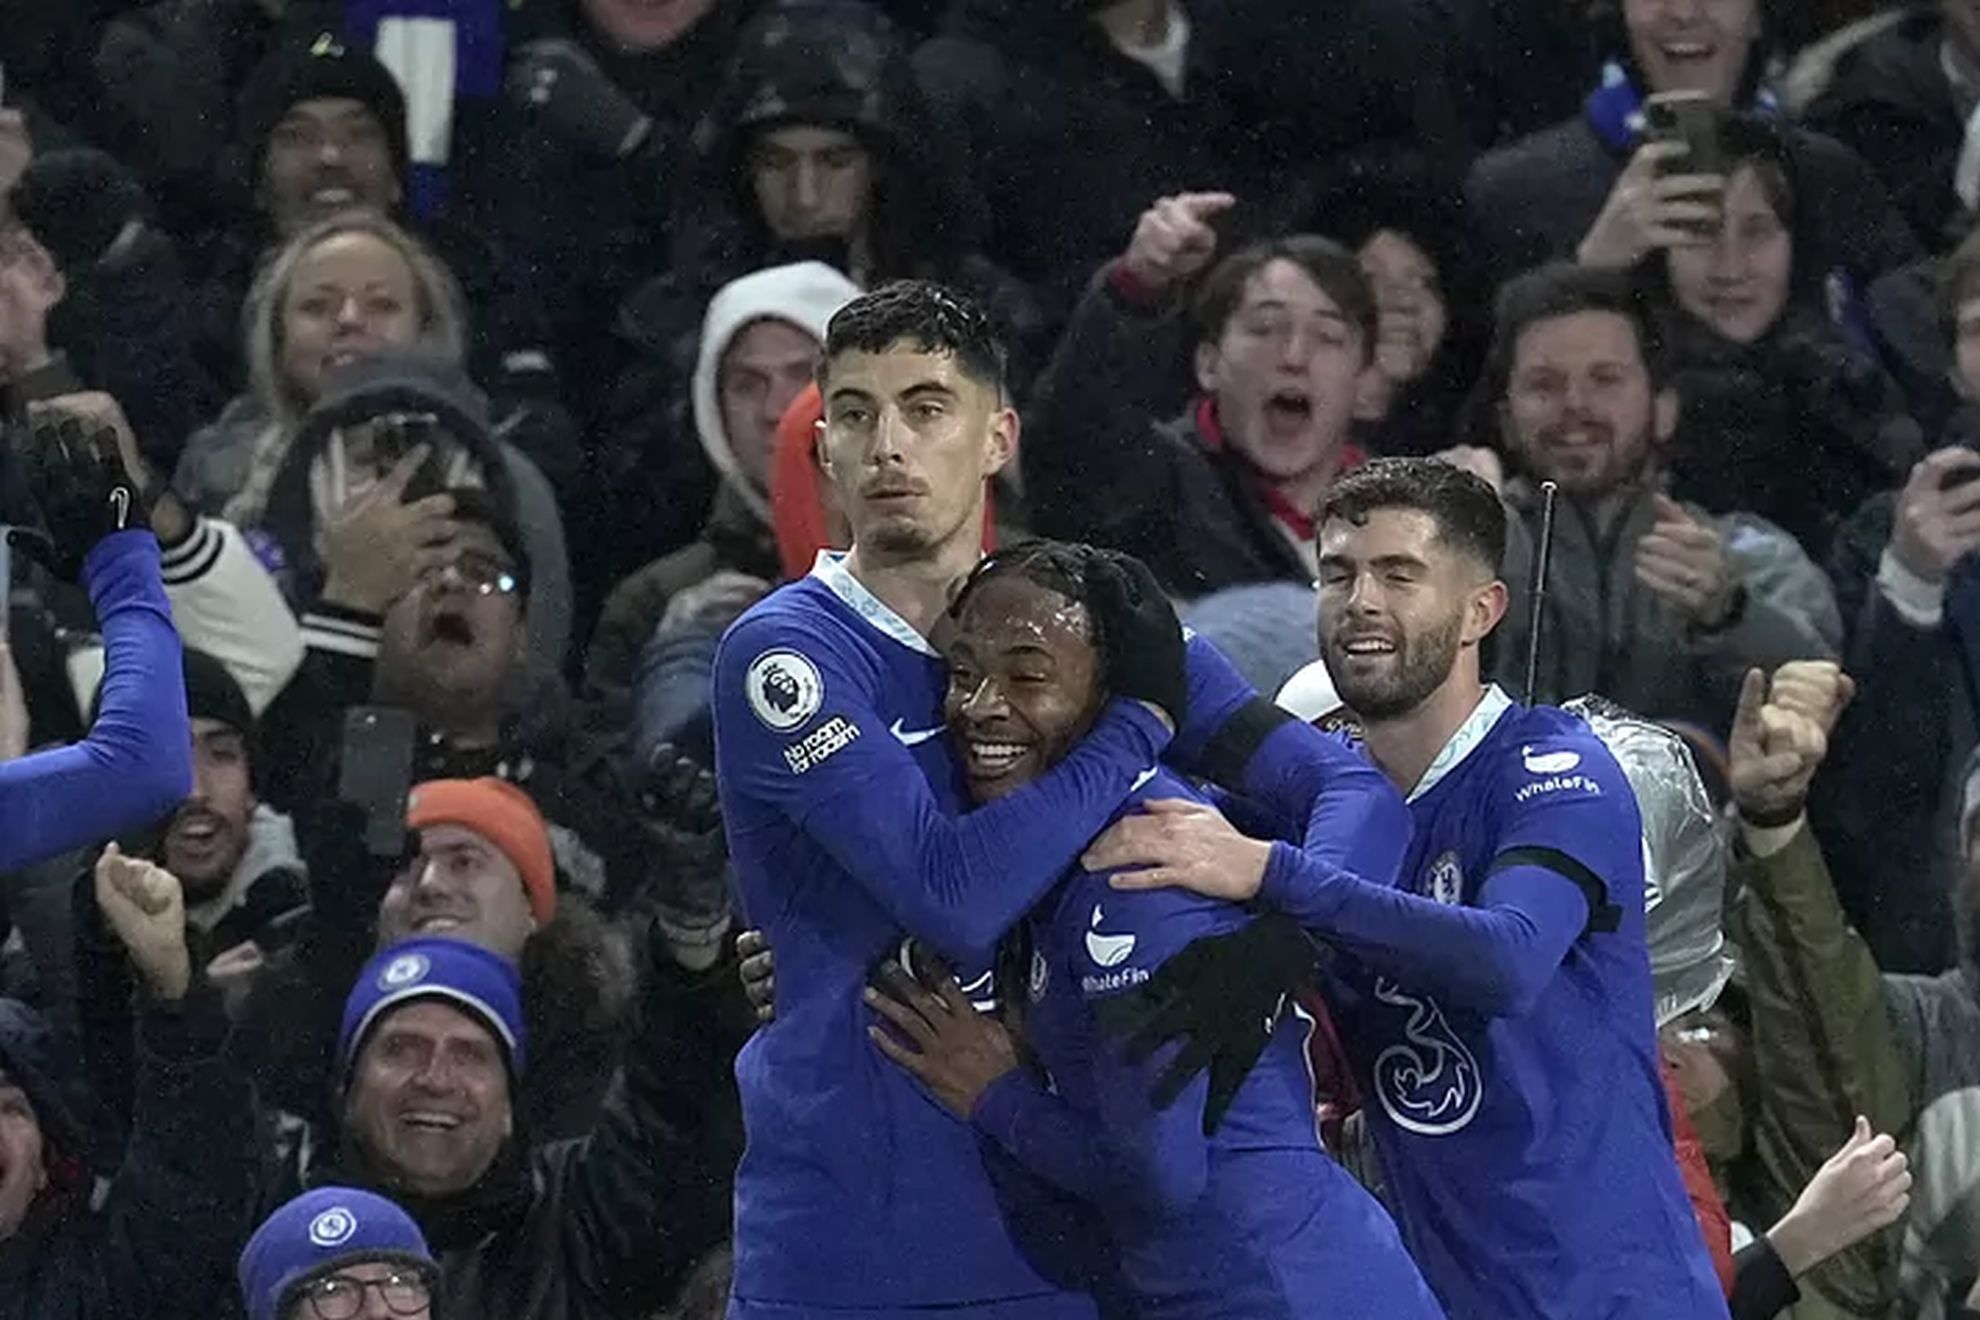 Chelsea celebrate a goal against Bournemouth